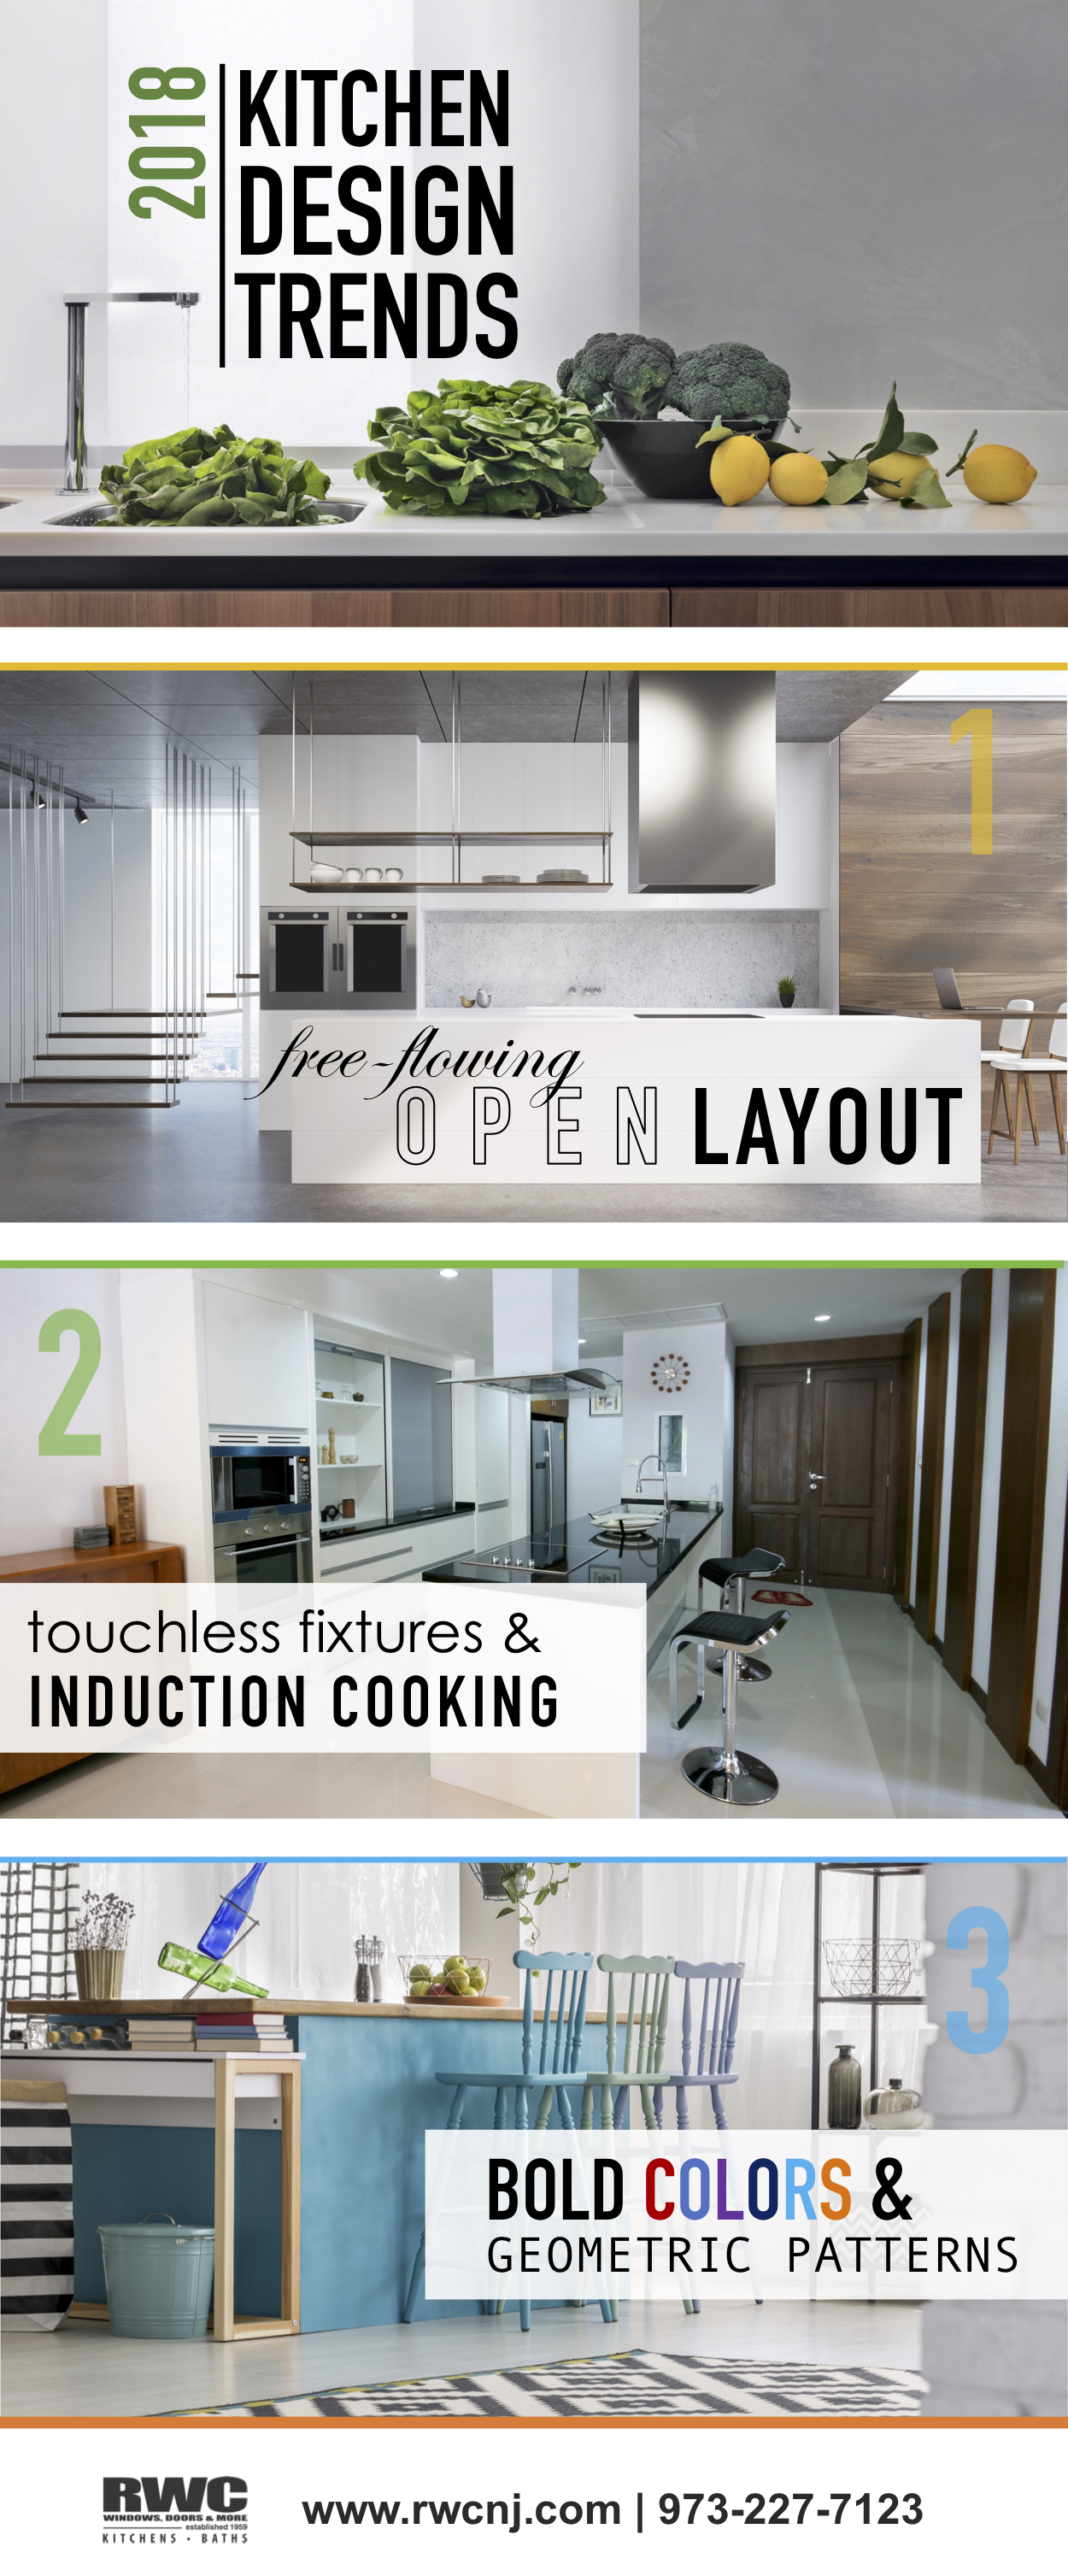 Home Designs trends for 2018, Kitchen trends for 2018, 2018 Kitchen trends